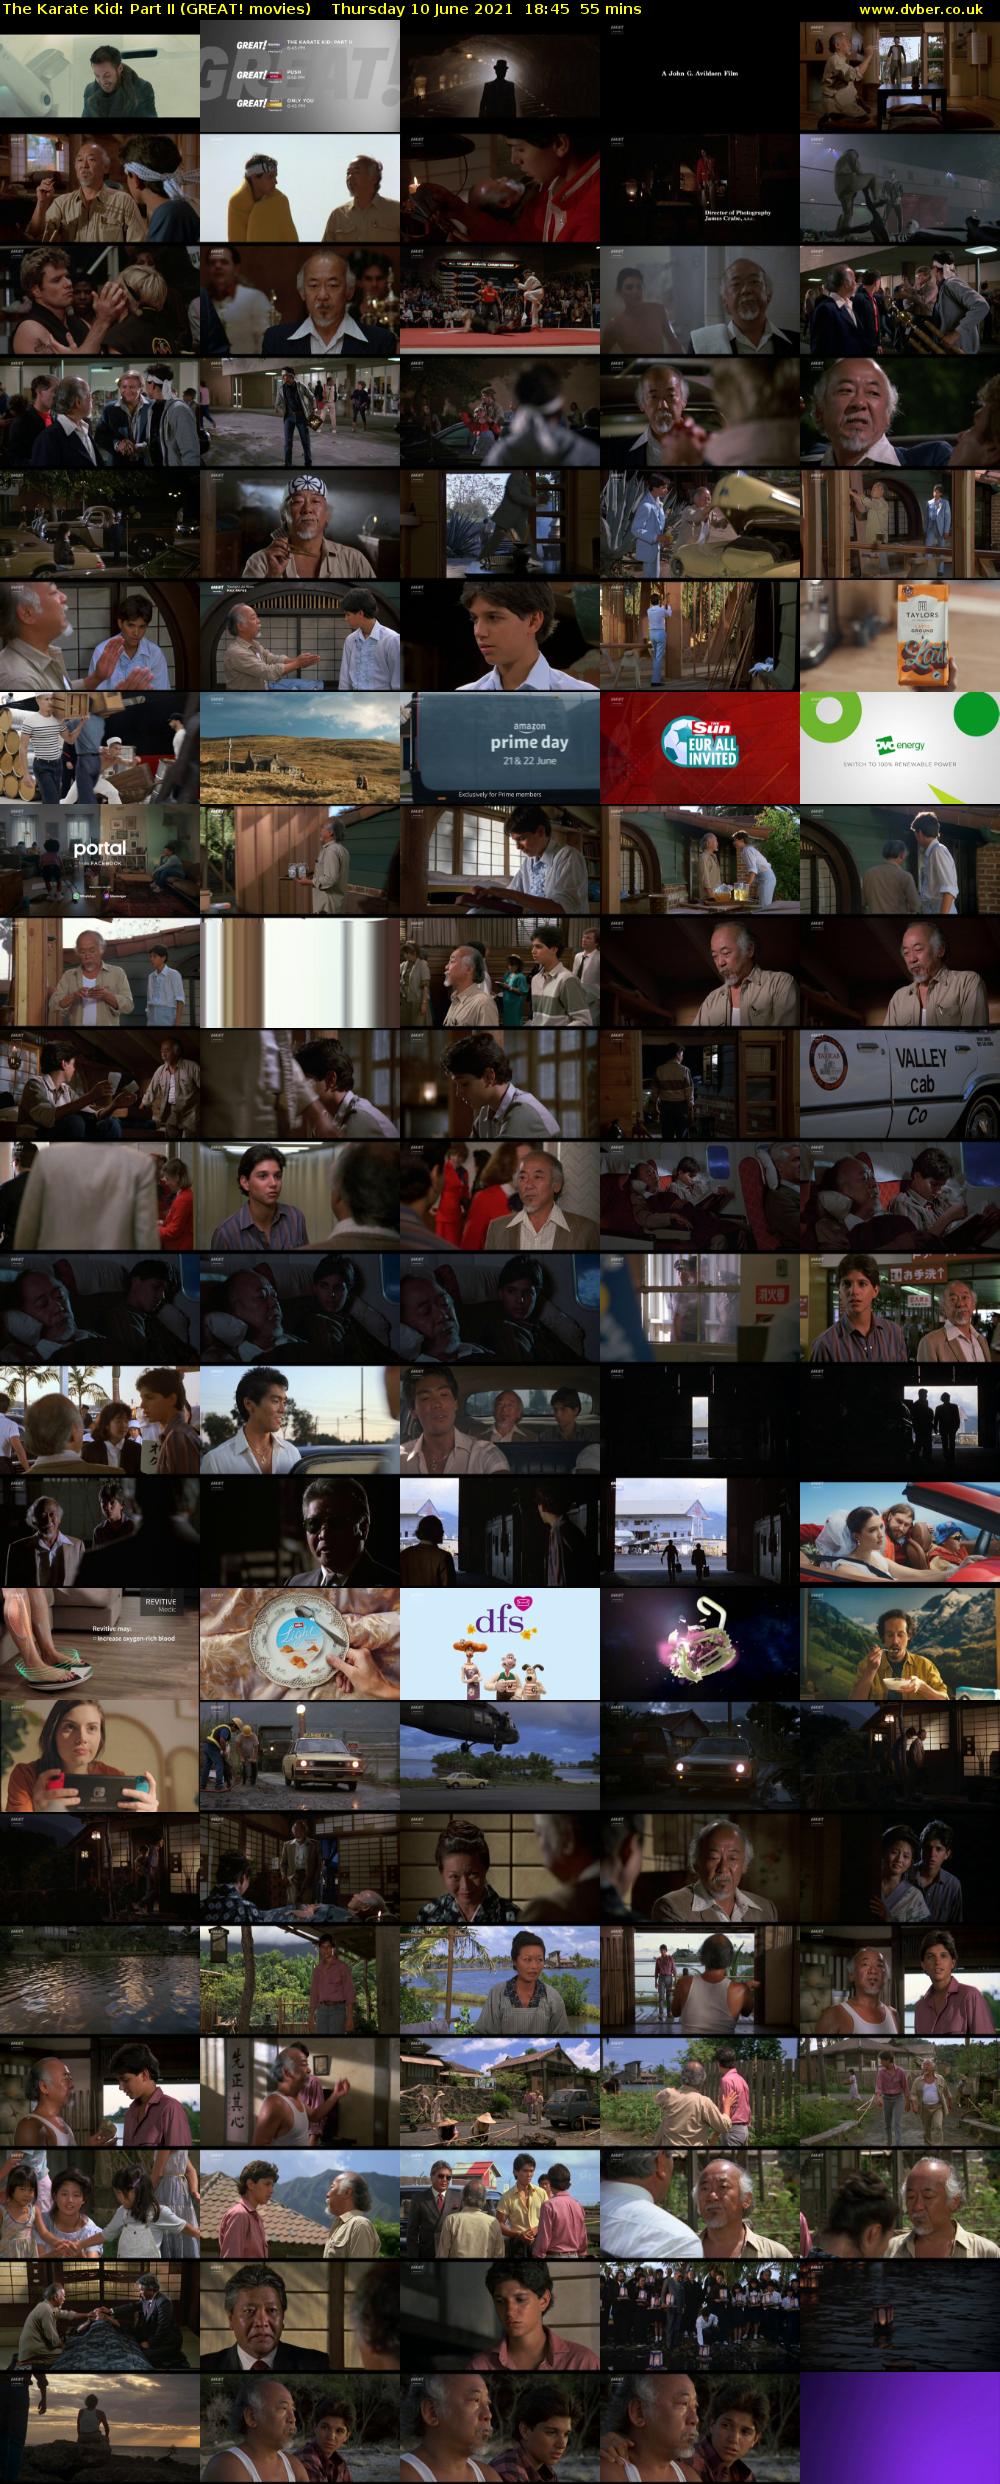 The Karate Kid: Part II (GREAT! movies) Thursday 10 June 2021 18:45 - 19:40